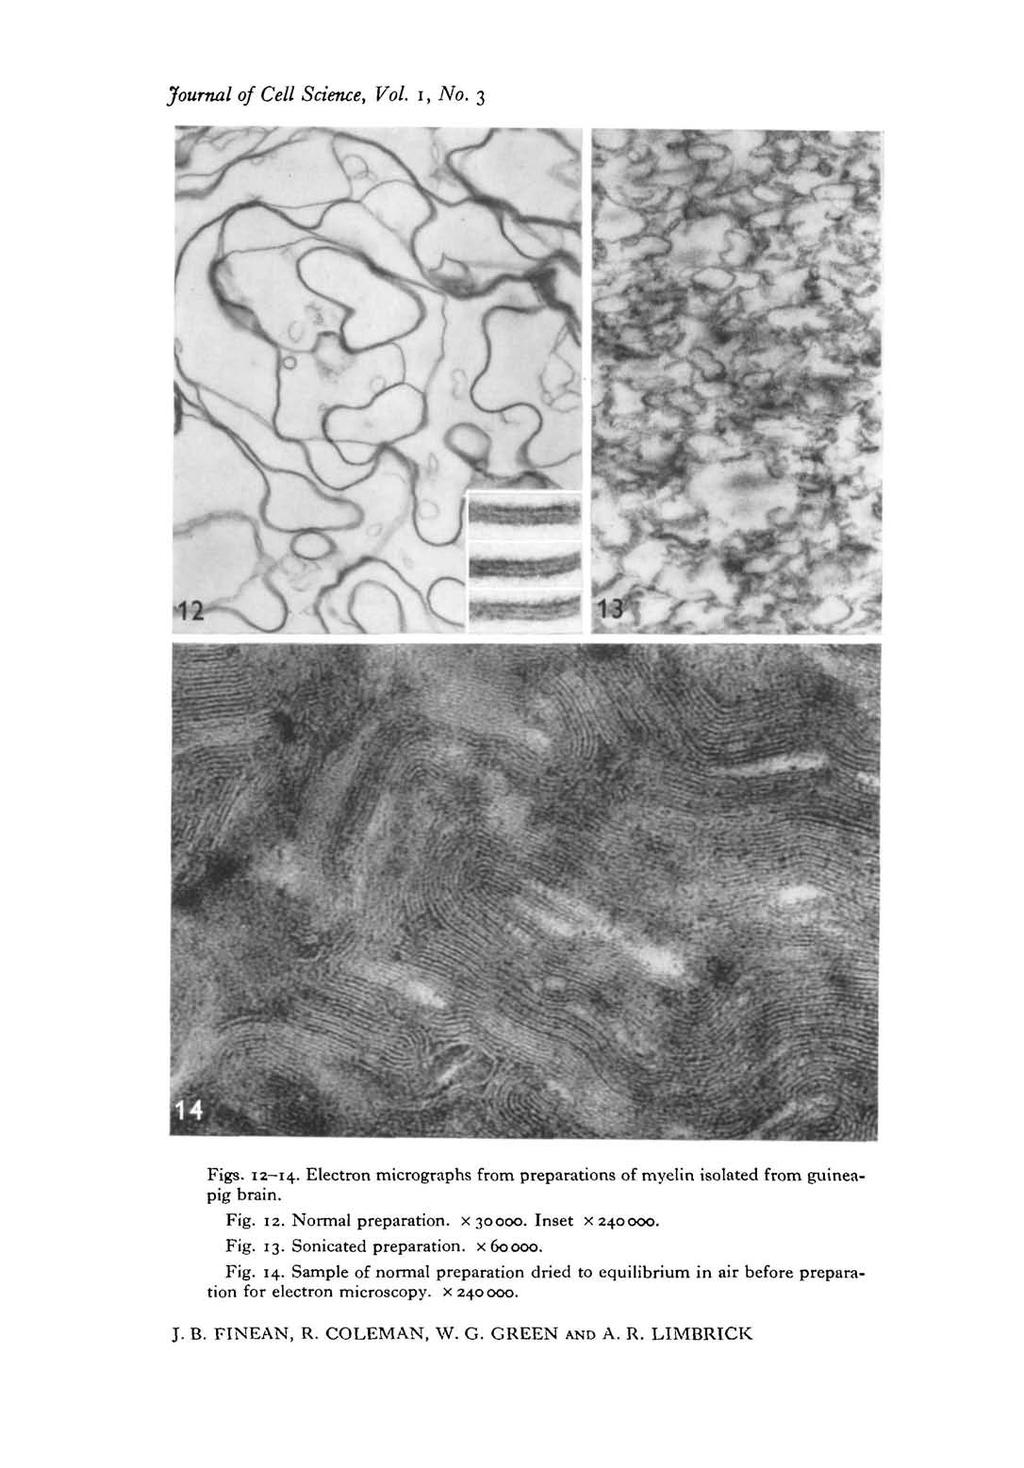 Journal of Cell Science, Vol. i, No. 3 Figs. 12-14. Electron micrographs from preparations of myelin isolated from guineapig brain. Fig. 12. Normal preparation, x 30000. Inset x 240000. Fig. 13.